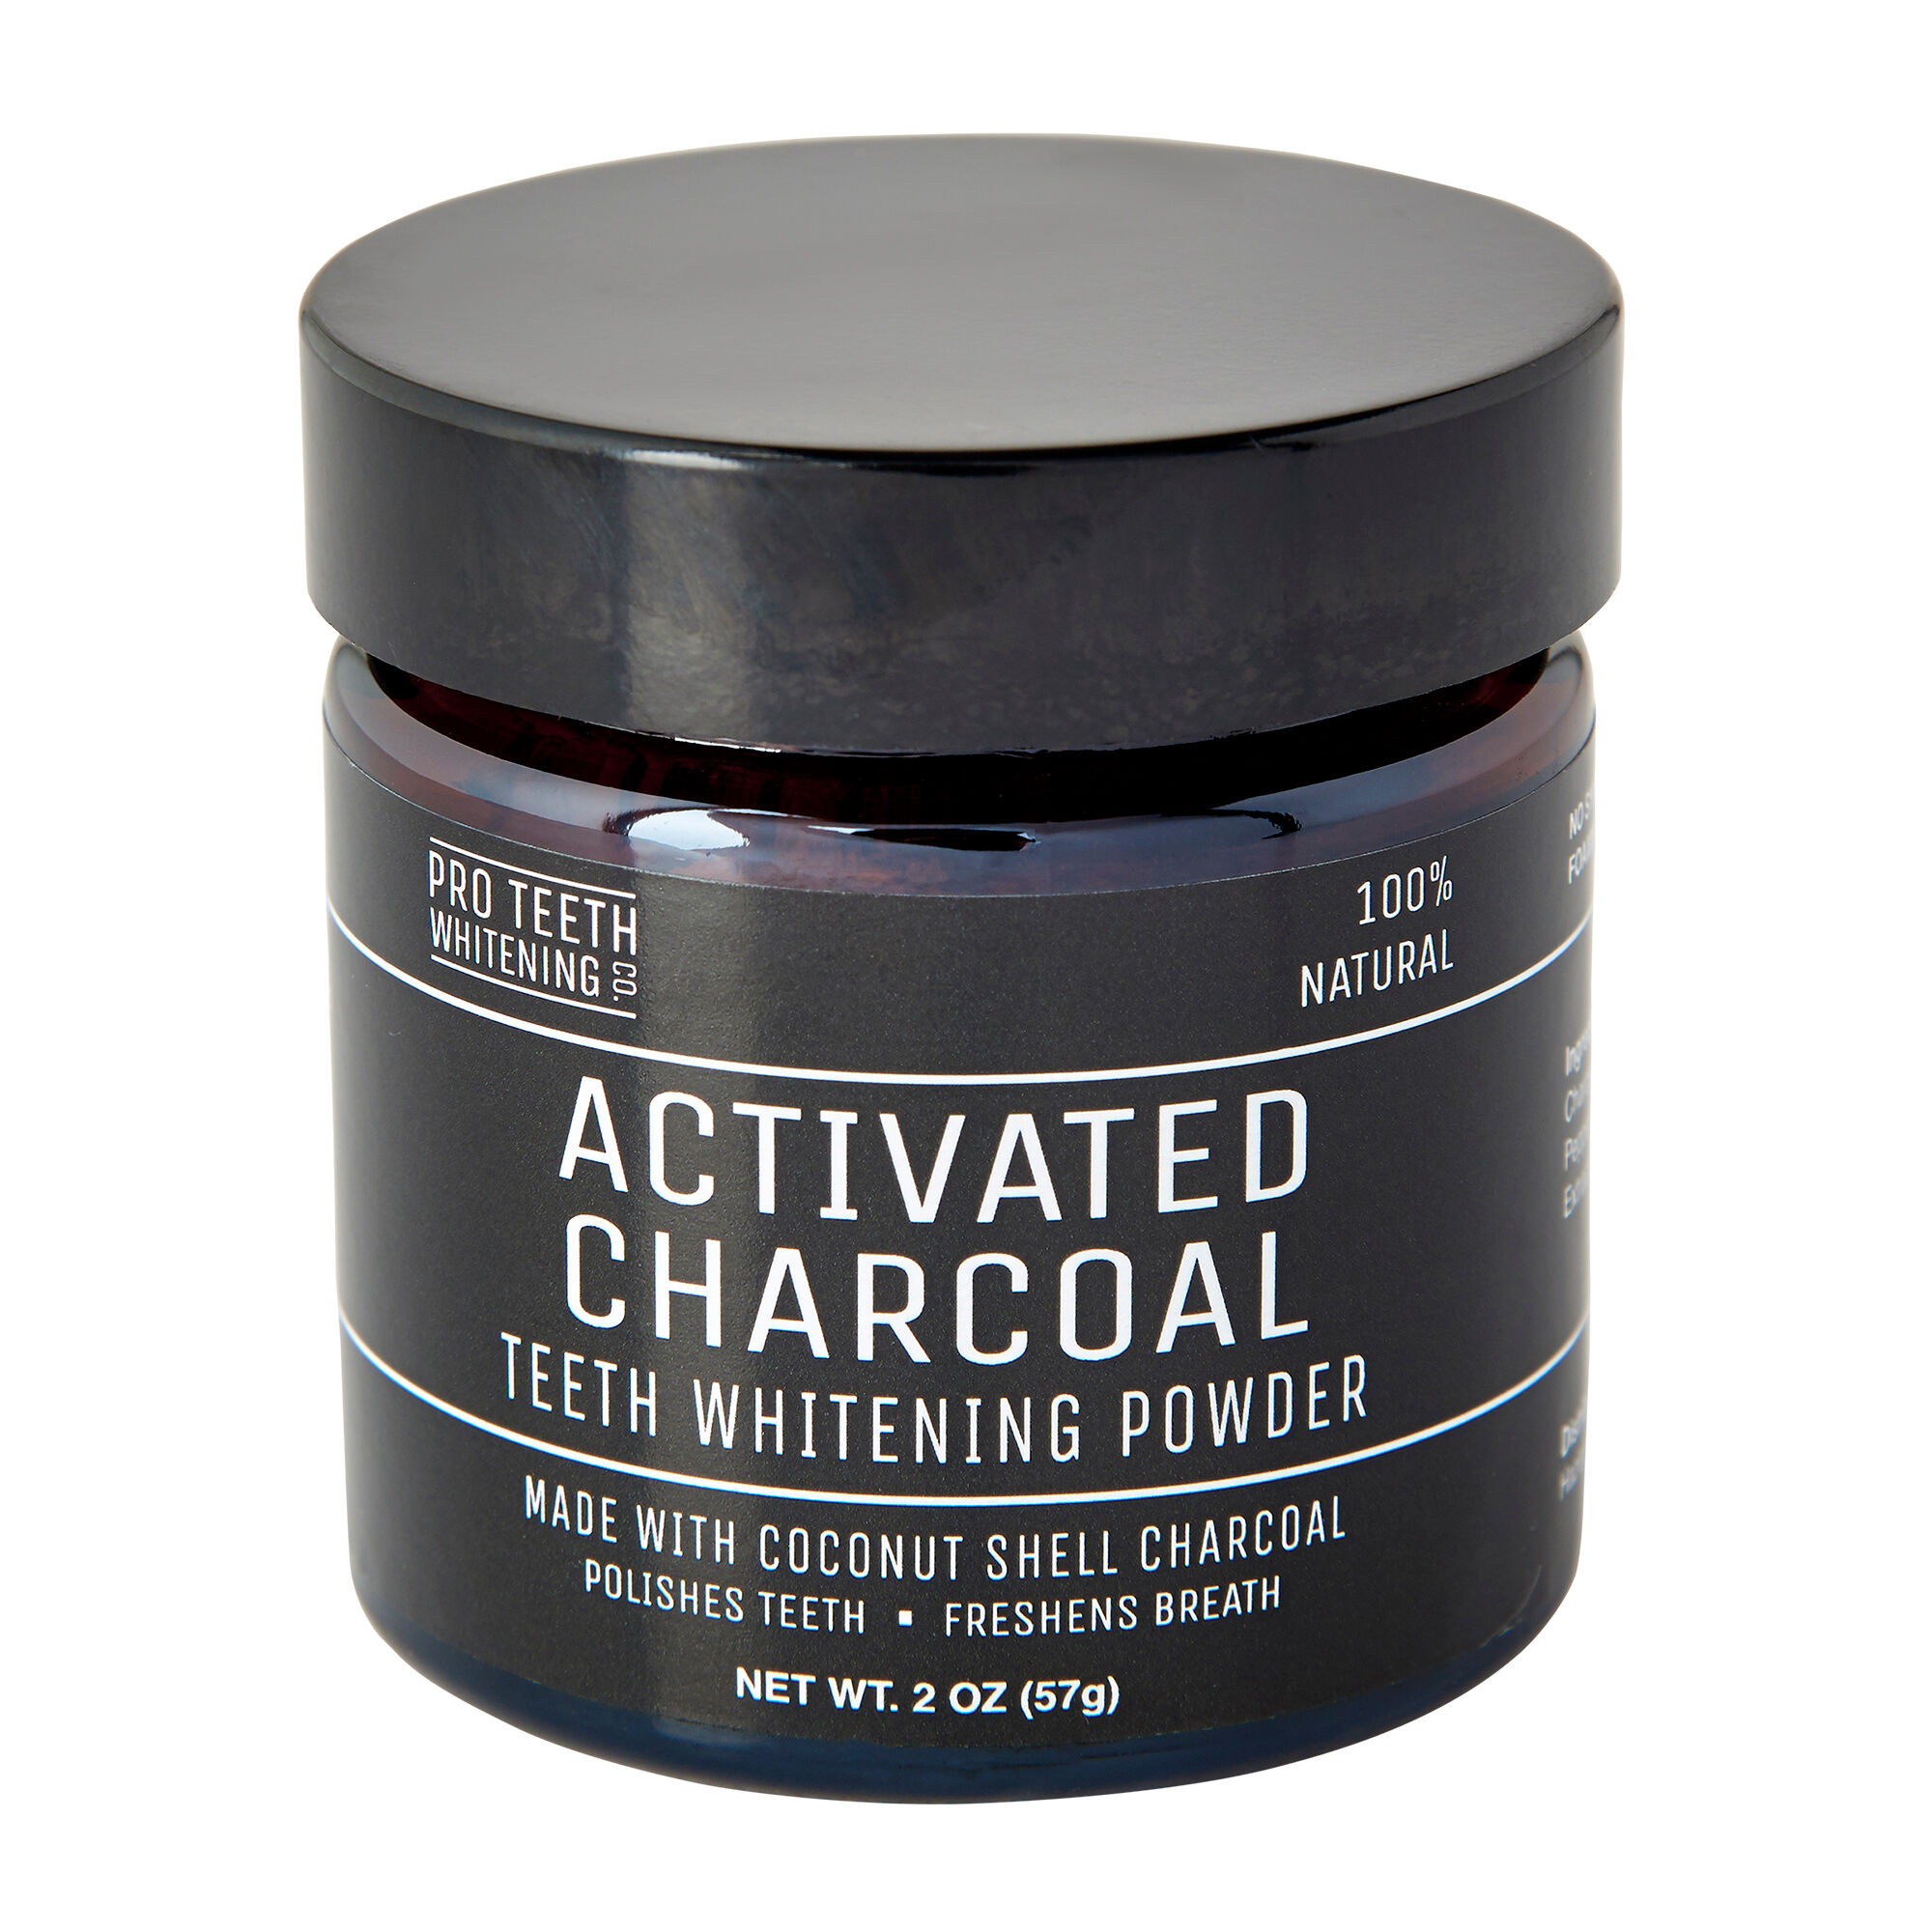 PRO TEETH WHITENING CO. Activated Charcoal Teeth Whitening Powder 60ml